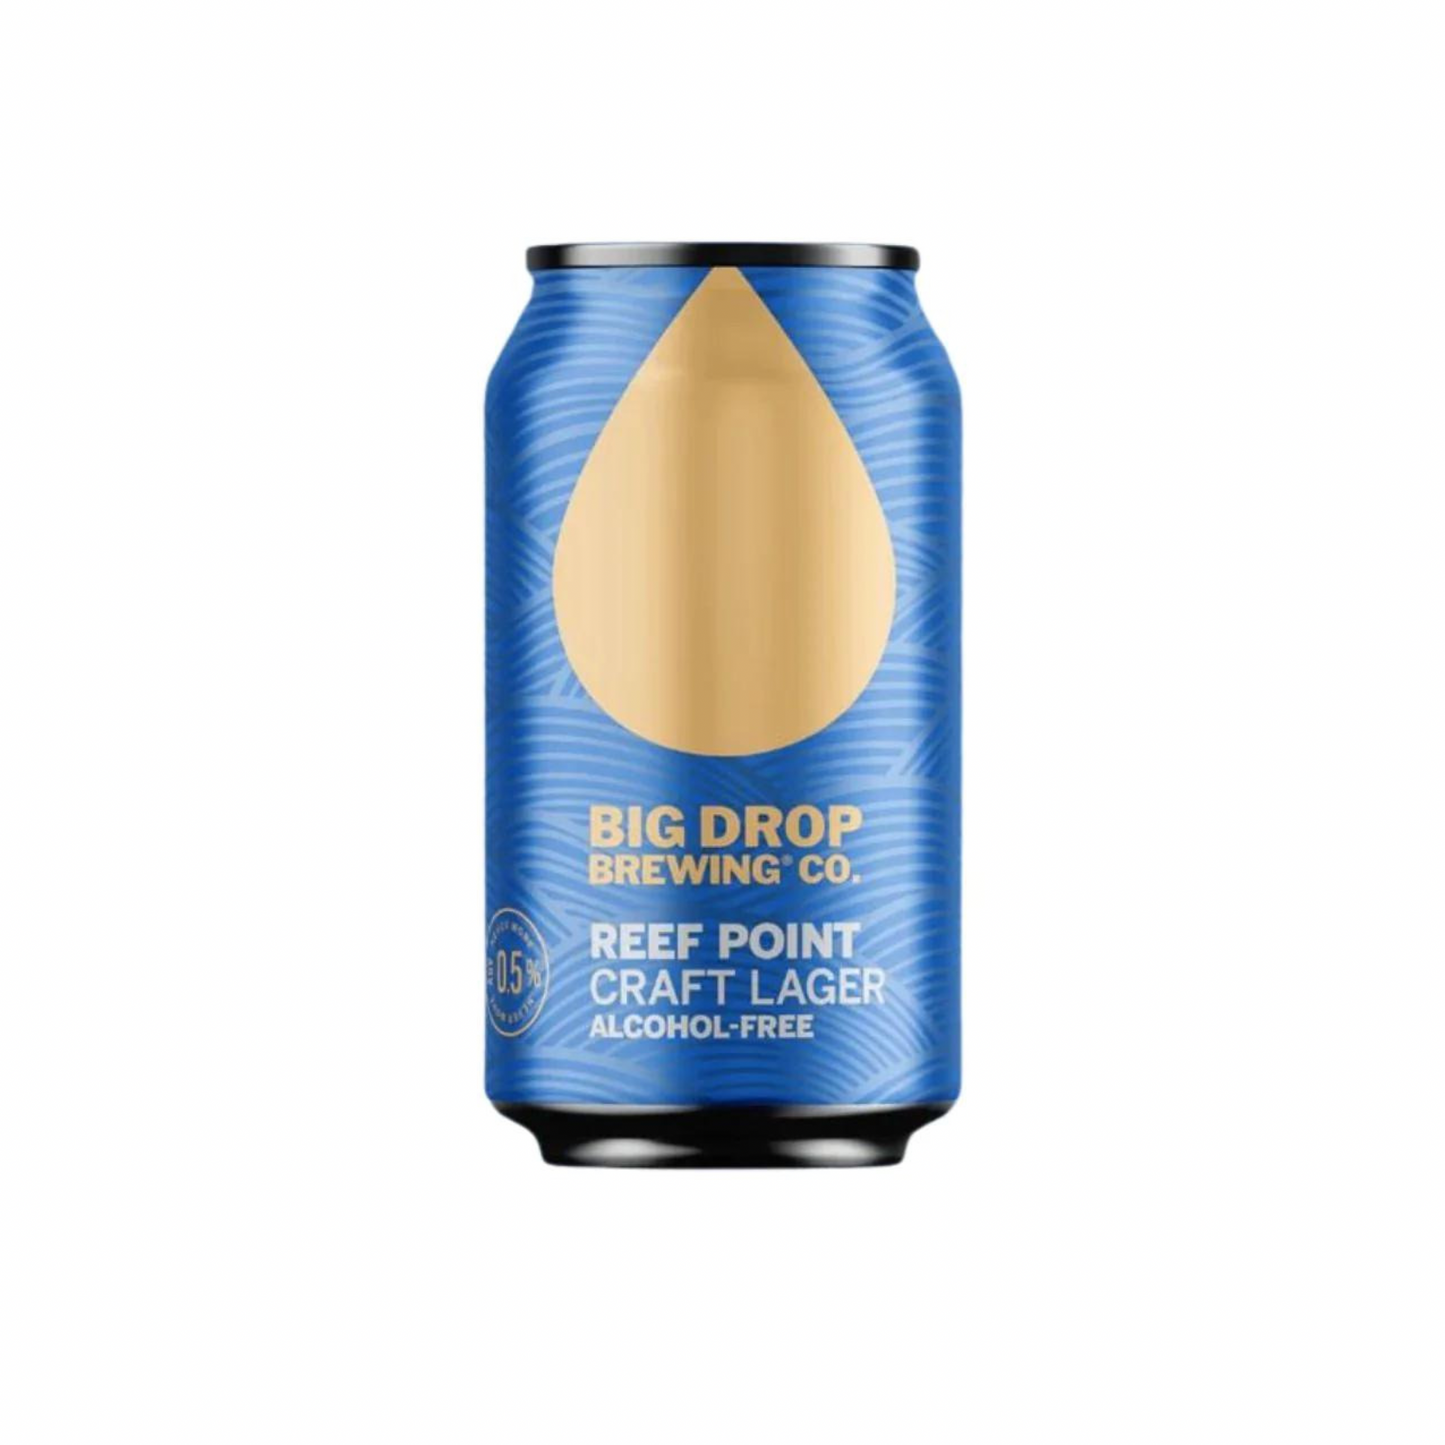 Big Drop Reef Point Craft Lager Alcohol-Free Beer